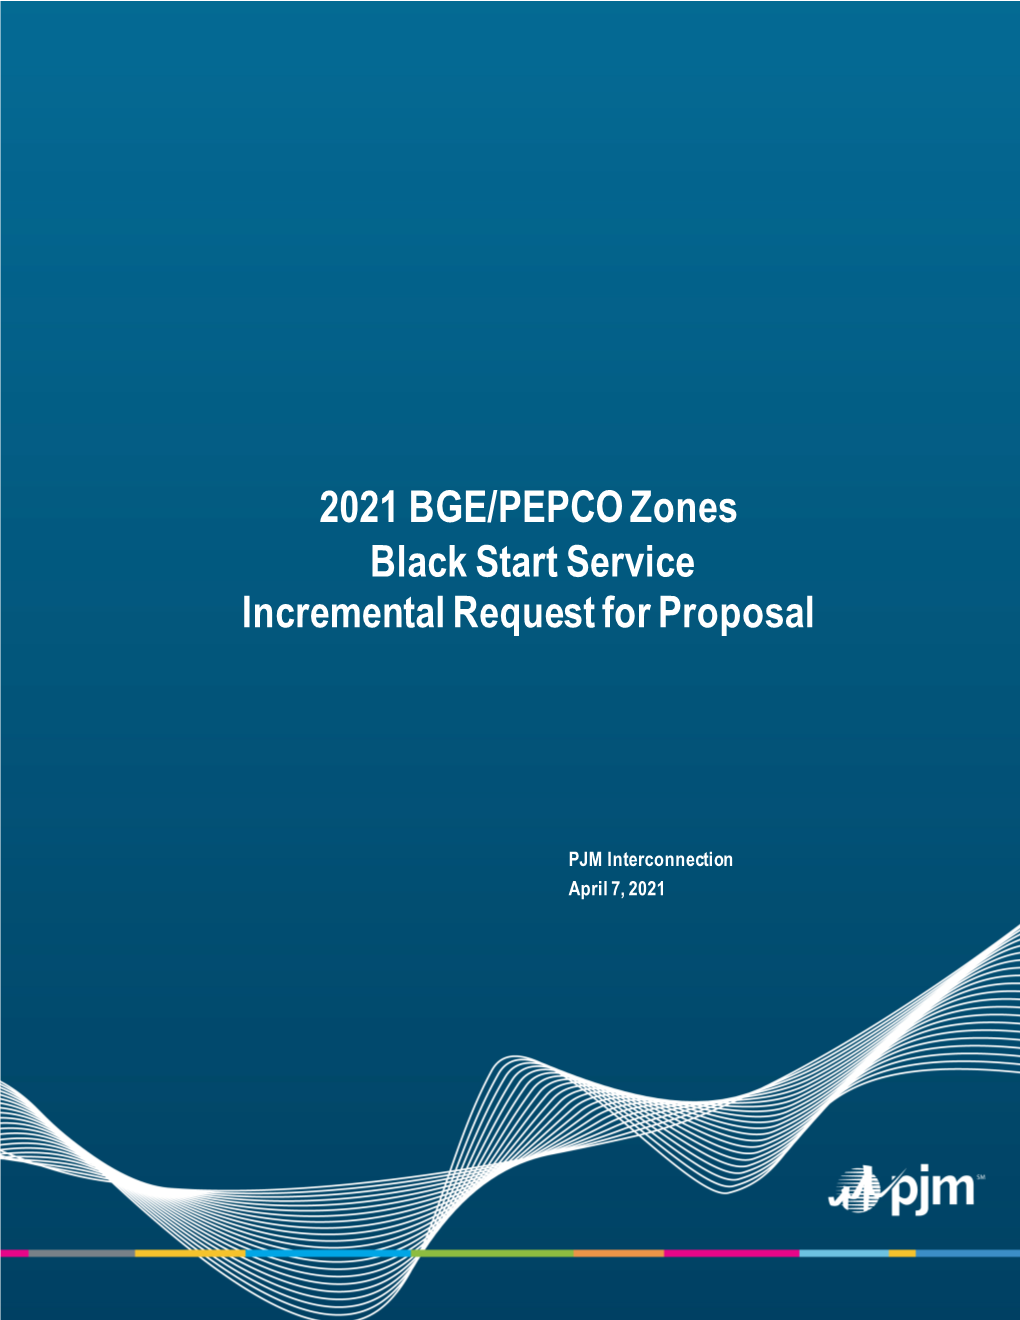 2021 BGE/PEPCO Zones Black Start Service Incremental Request for Proposal